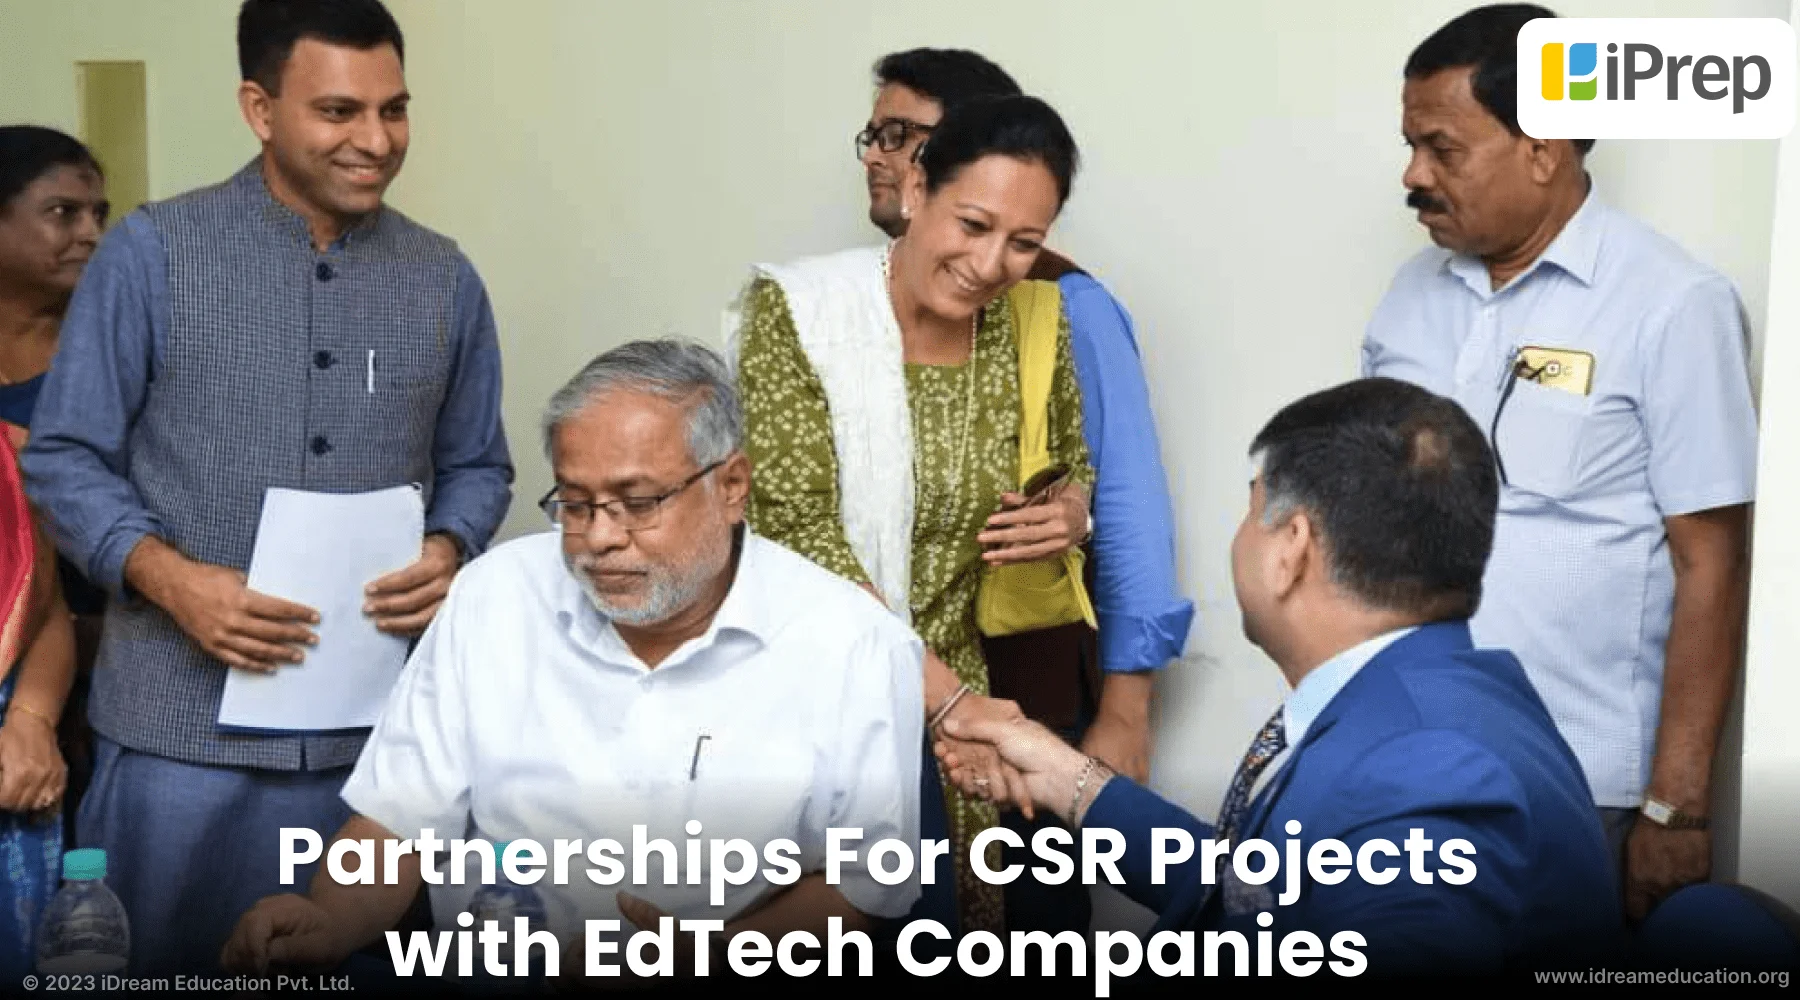 A visual representing partnerships for CSR projects in India with EdTech companies for digital education